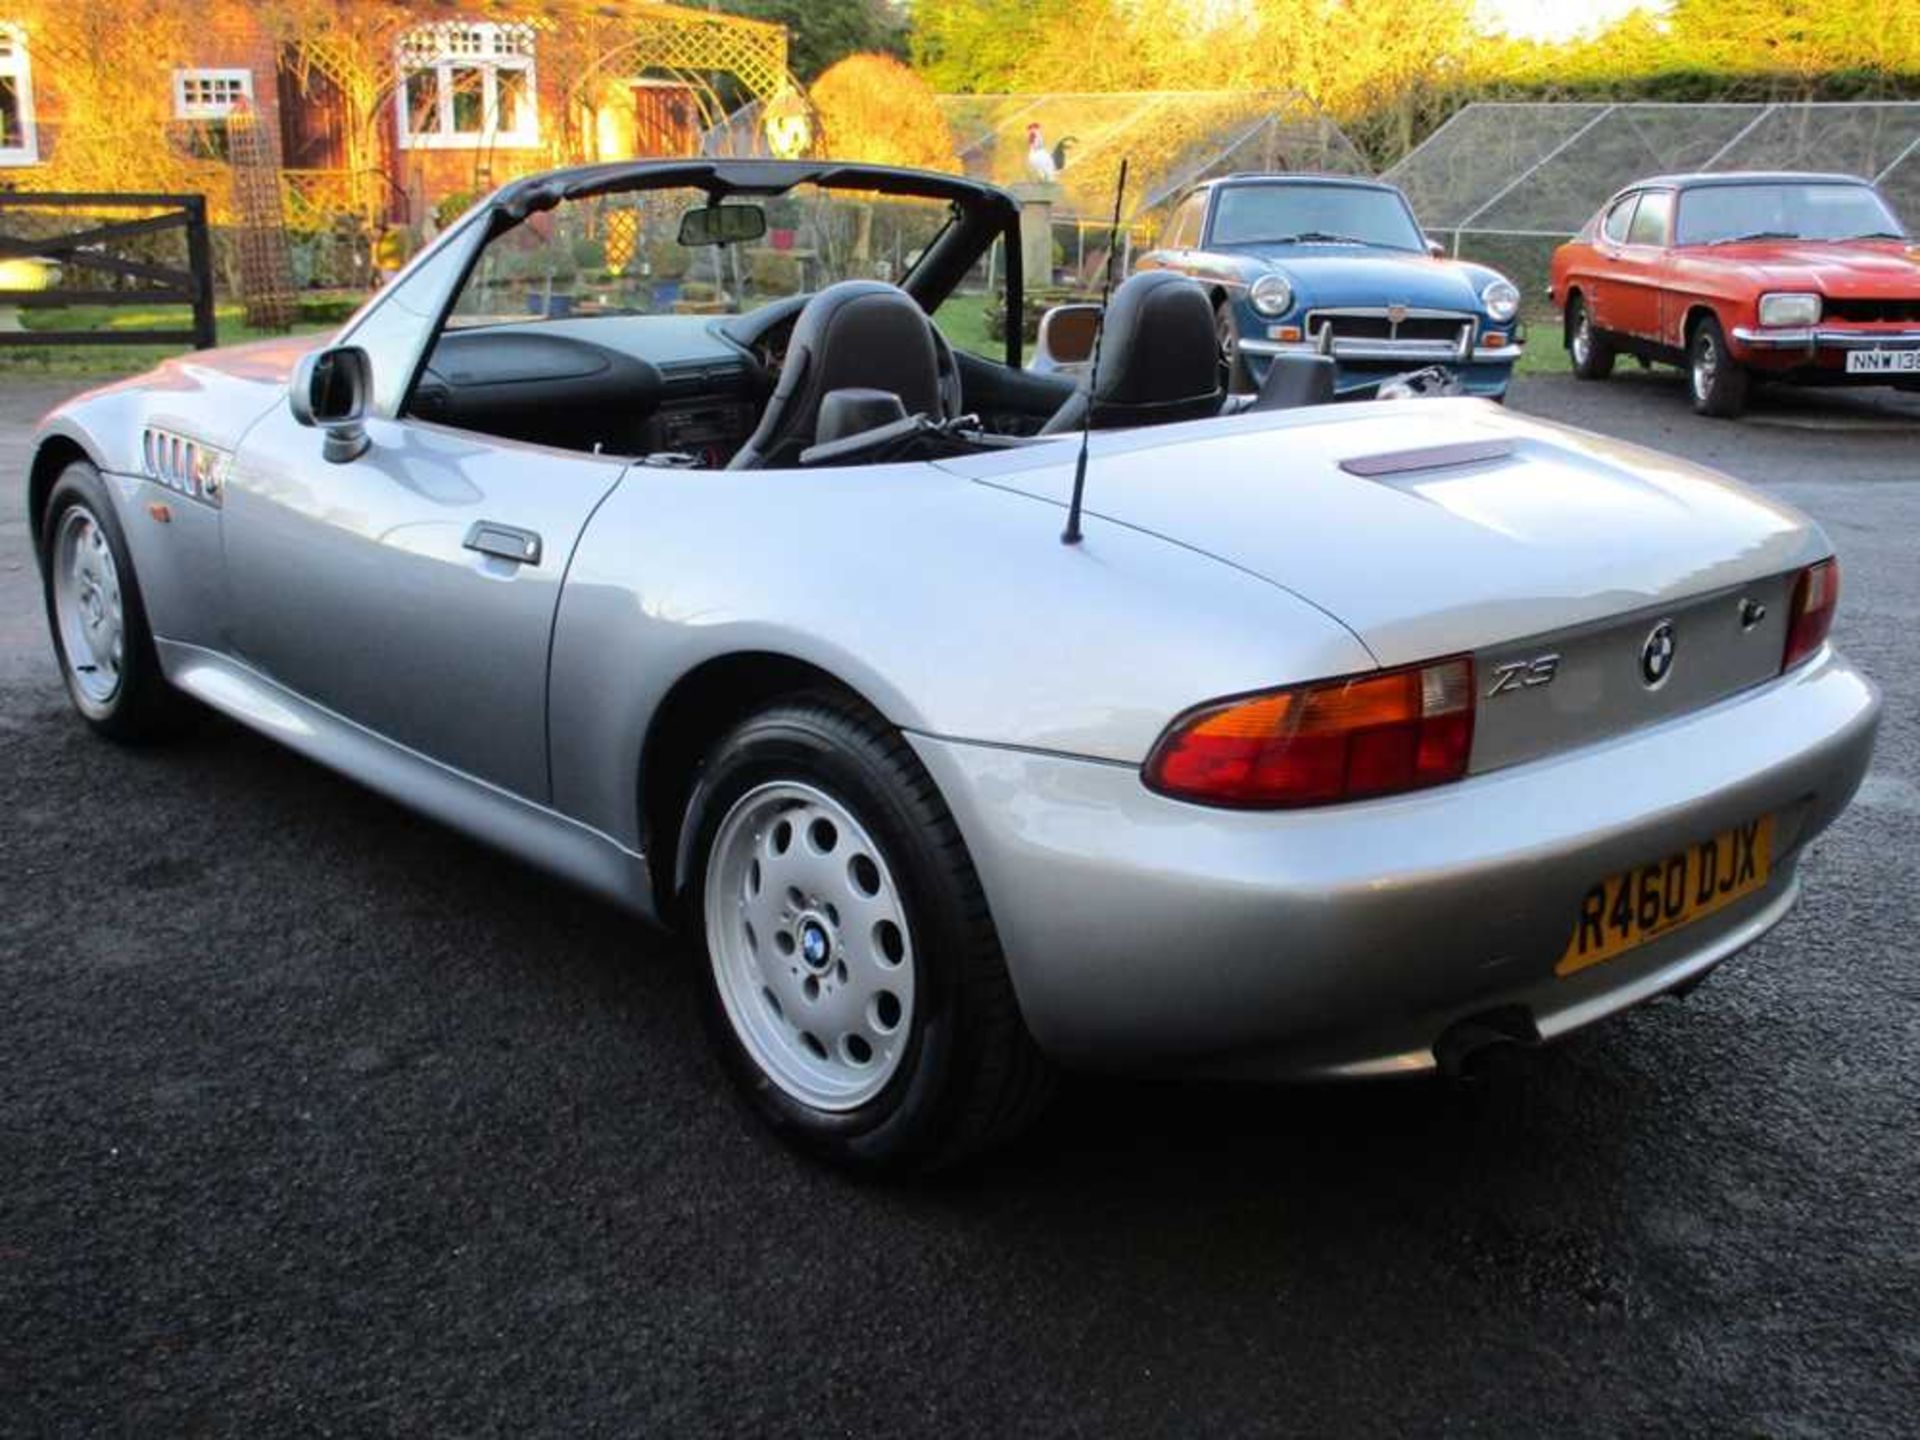 1998 BMW Z3 Roadster - Image 3 of 9